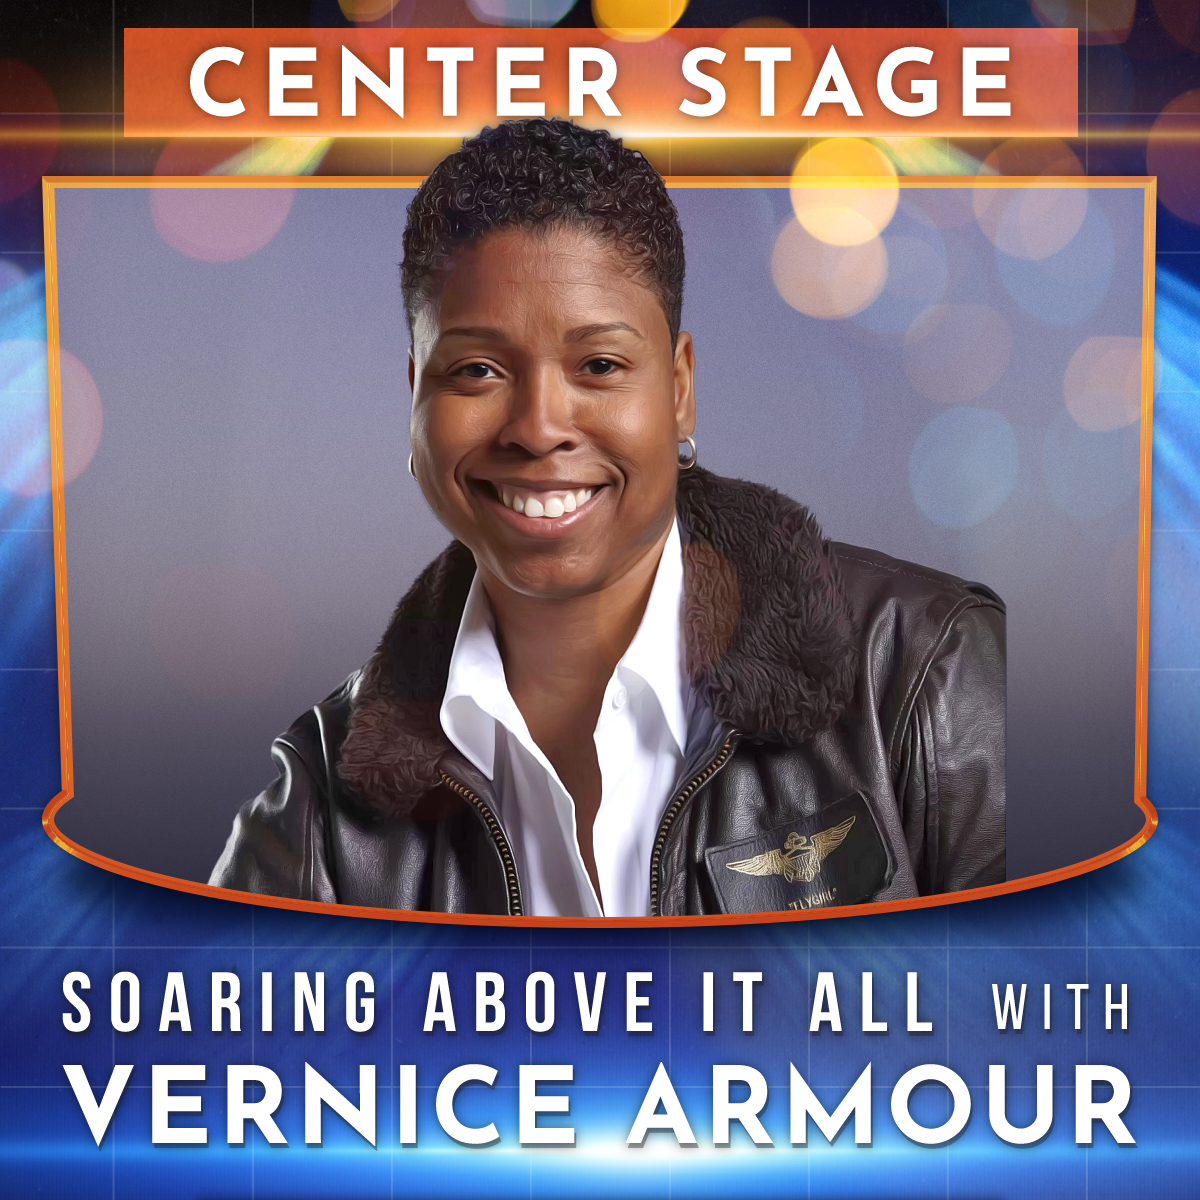 Vernice Armour, America’s first Black female combat pilot, former Marine and cop, business consultant, and bestselling author.